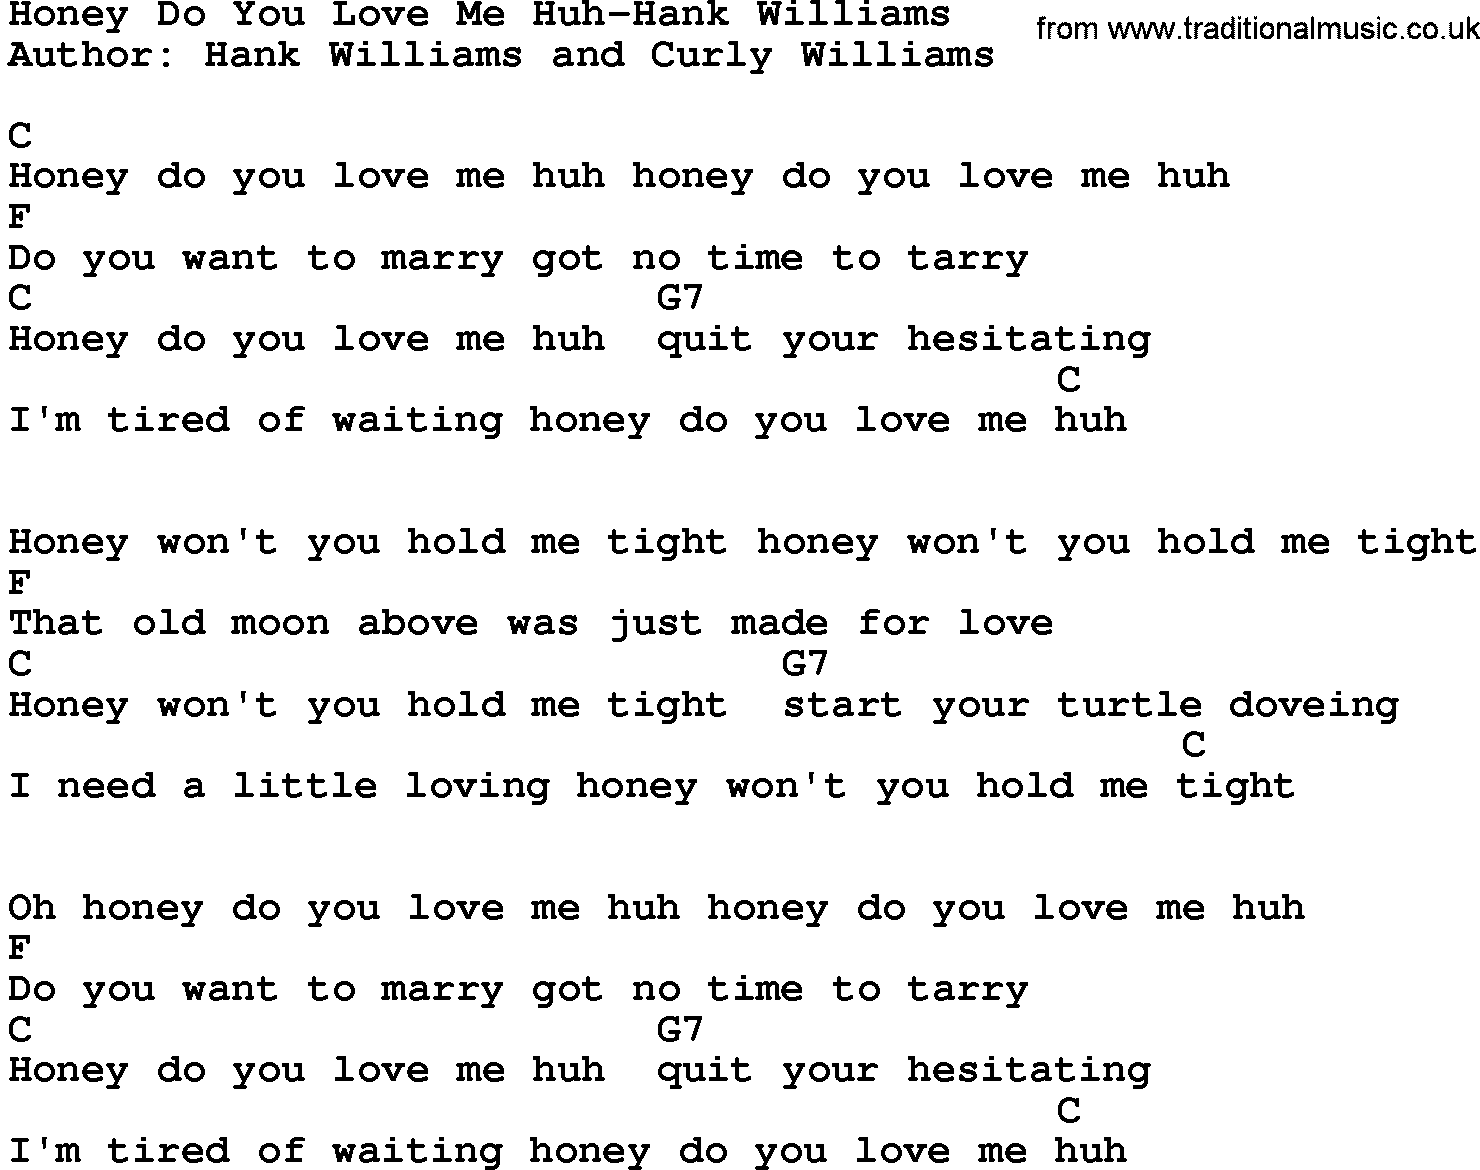 Country music song: Honey Do You Love Me Huh-Hank Williams lyrics and chords